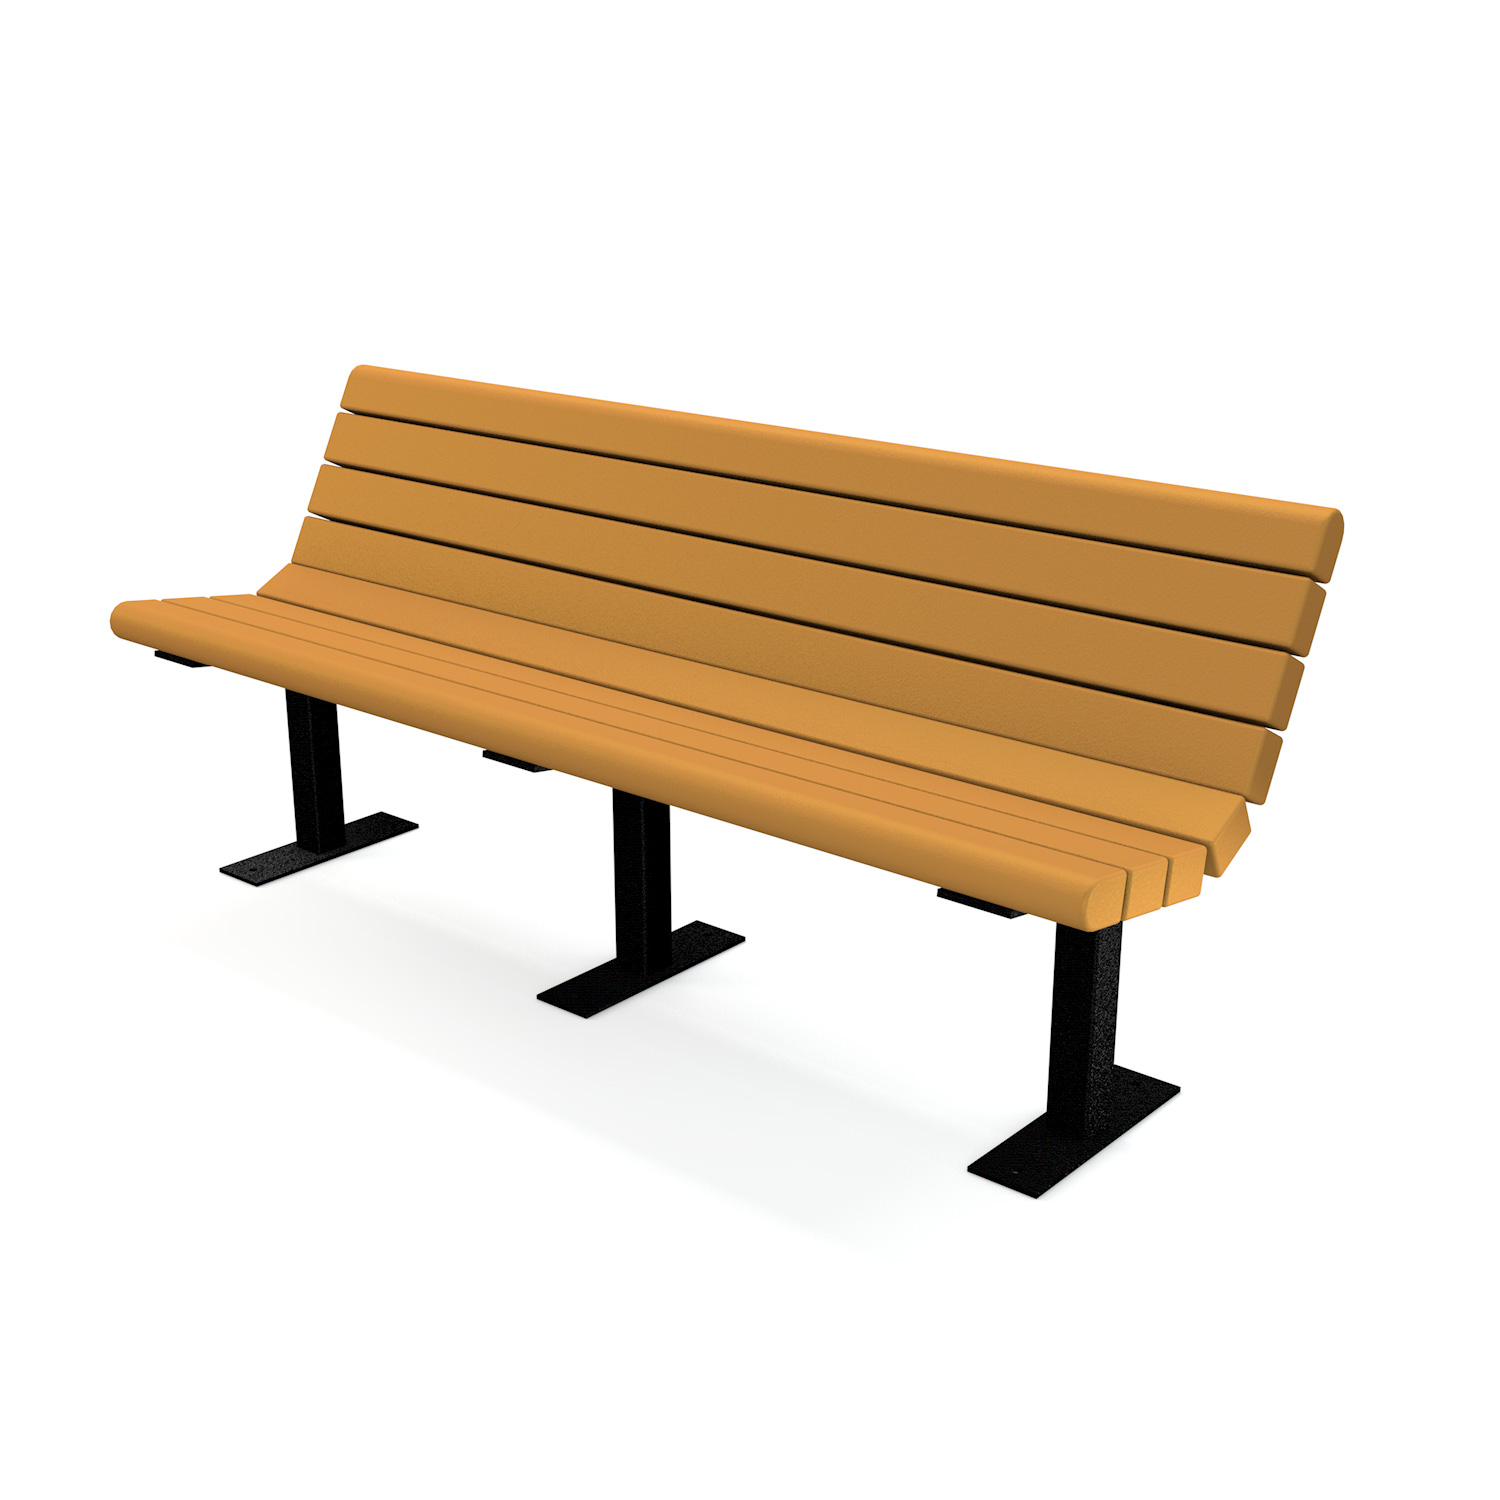 Jameson Recycled Plastic Lumber Park Bench